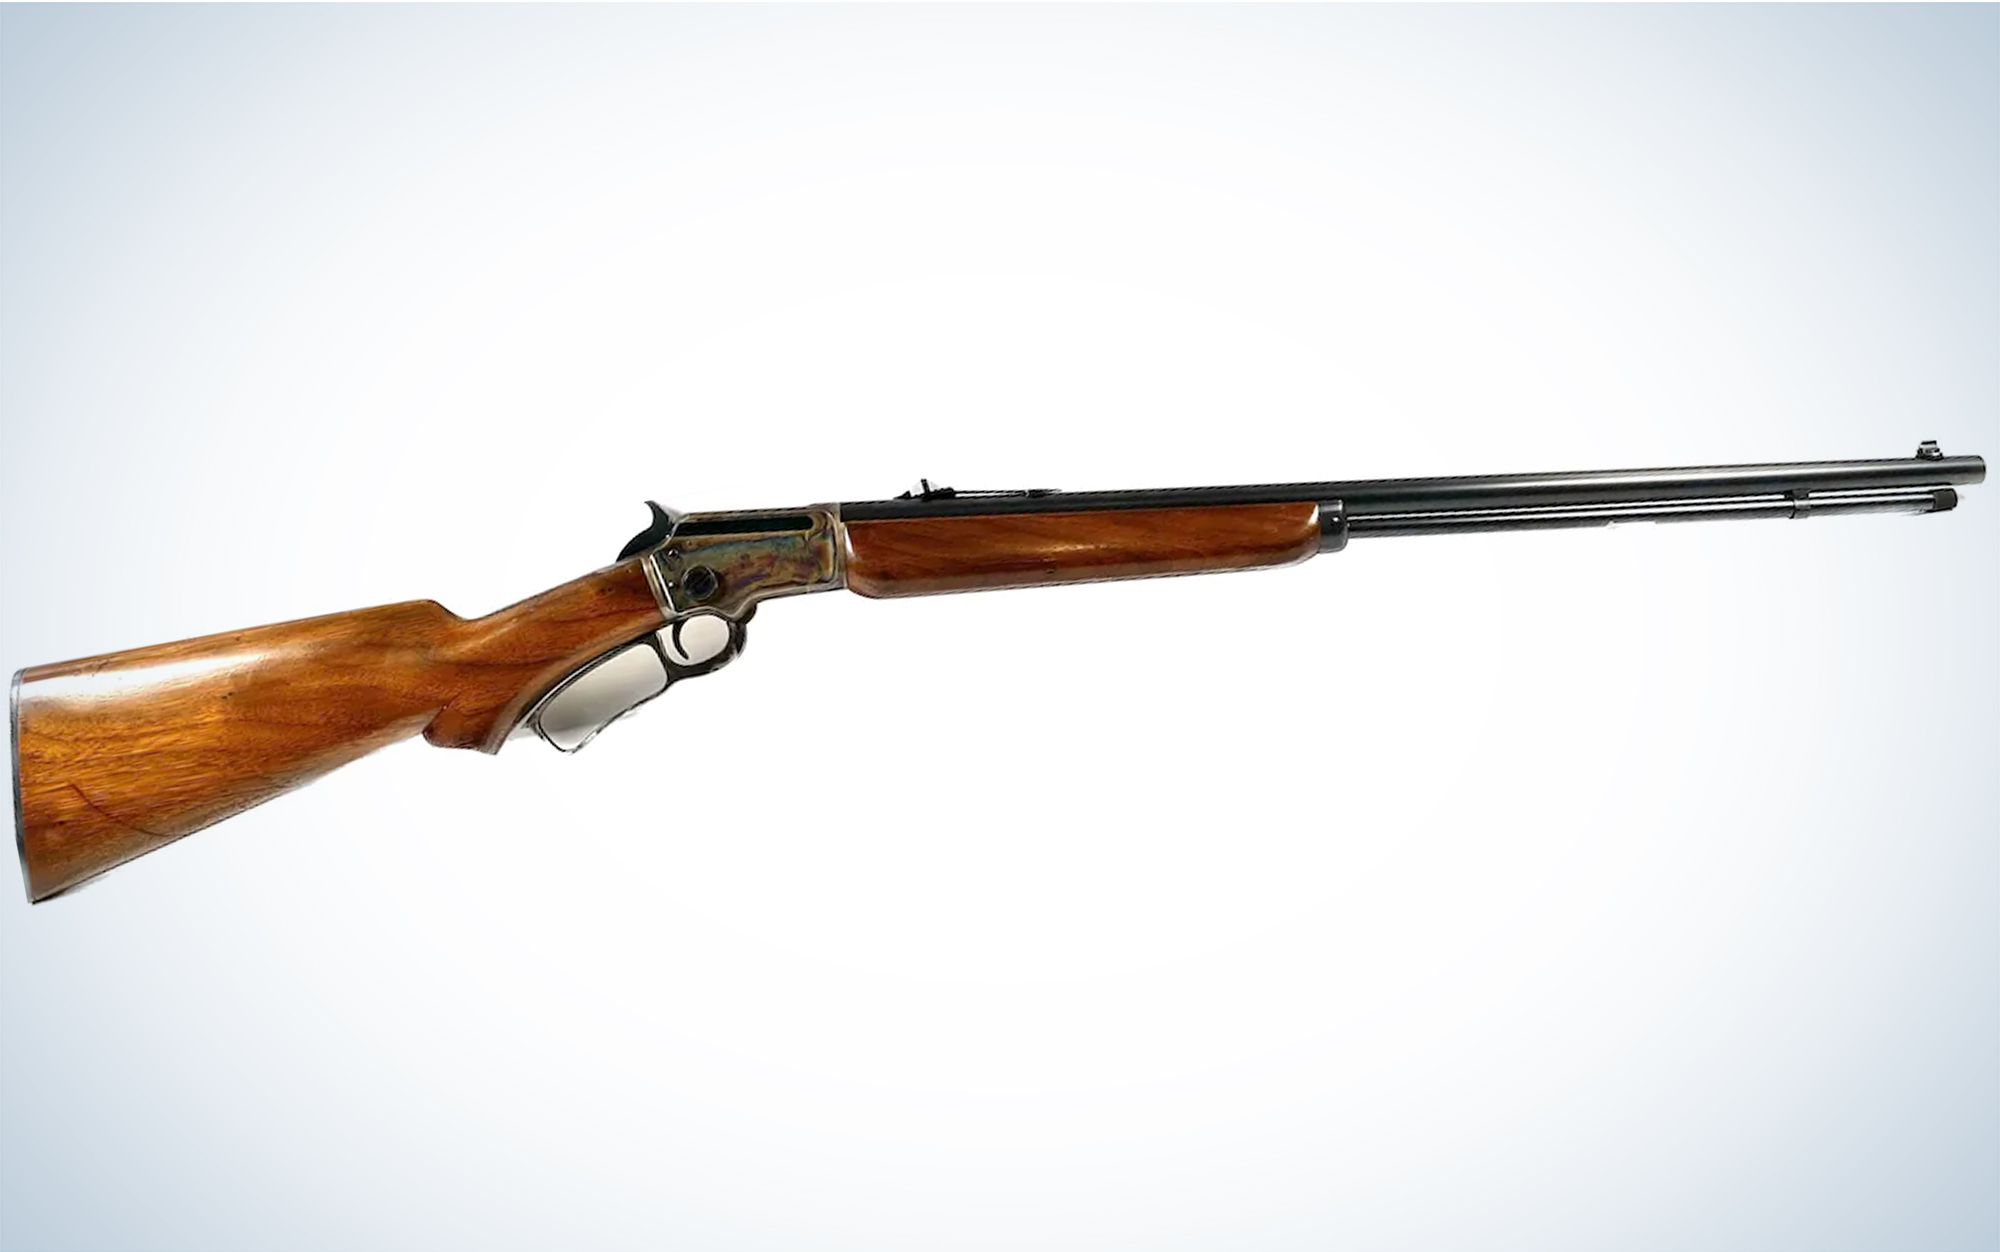 The Marlin 39A is one of the best lever action rifles.